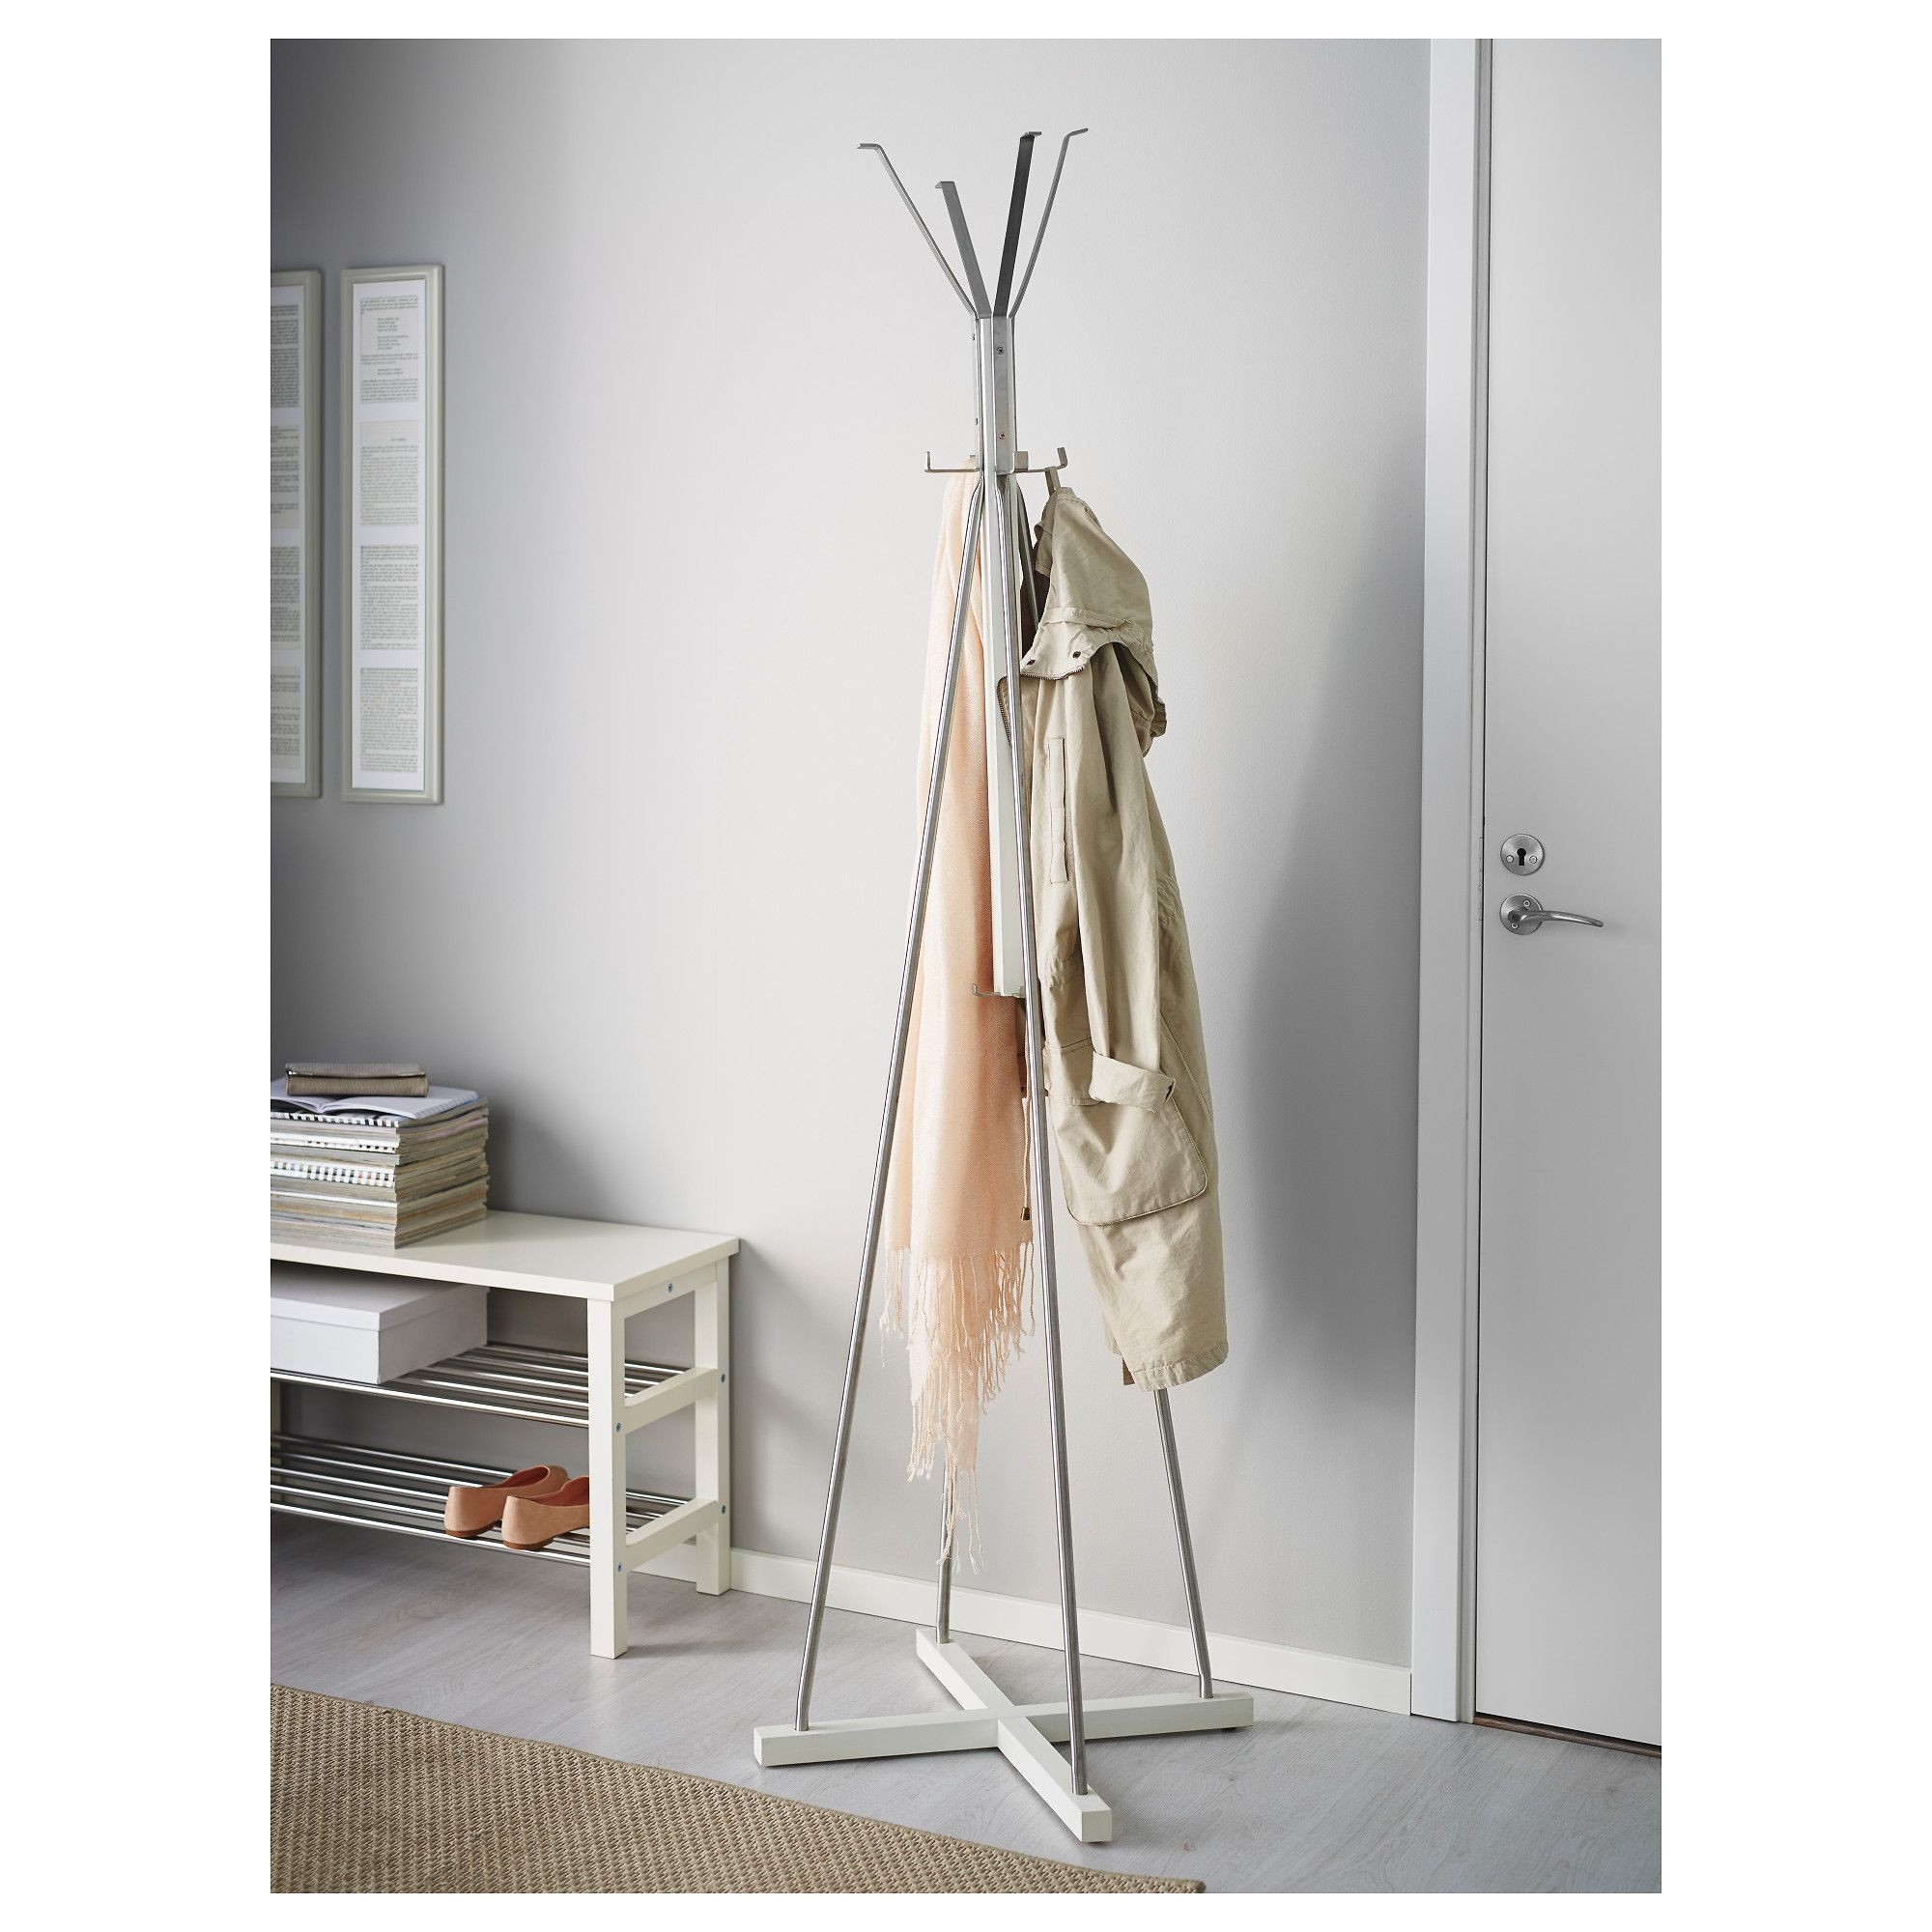 ironing board wall hook lovely ikea tjusig hat and coat stand coat rack stand pinterest